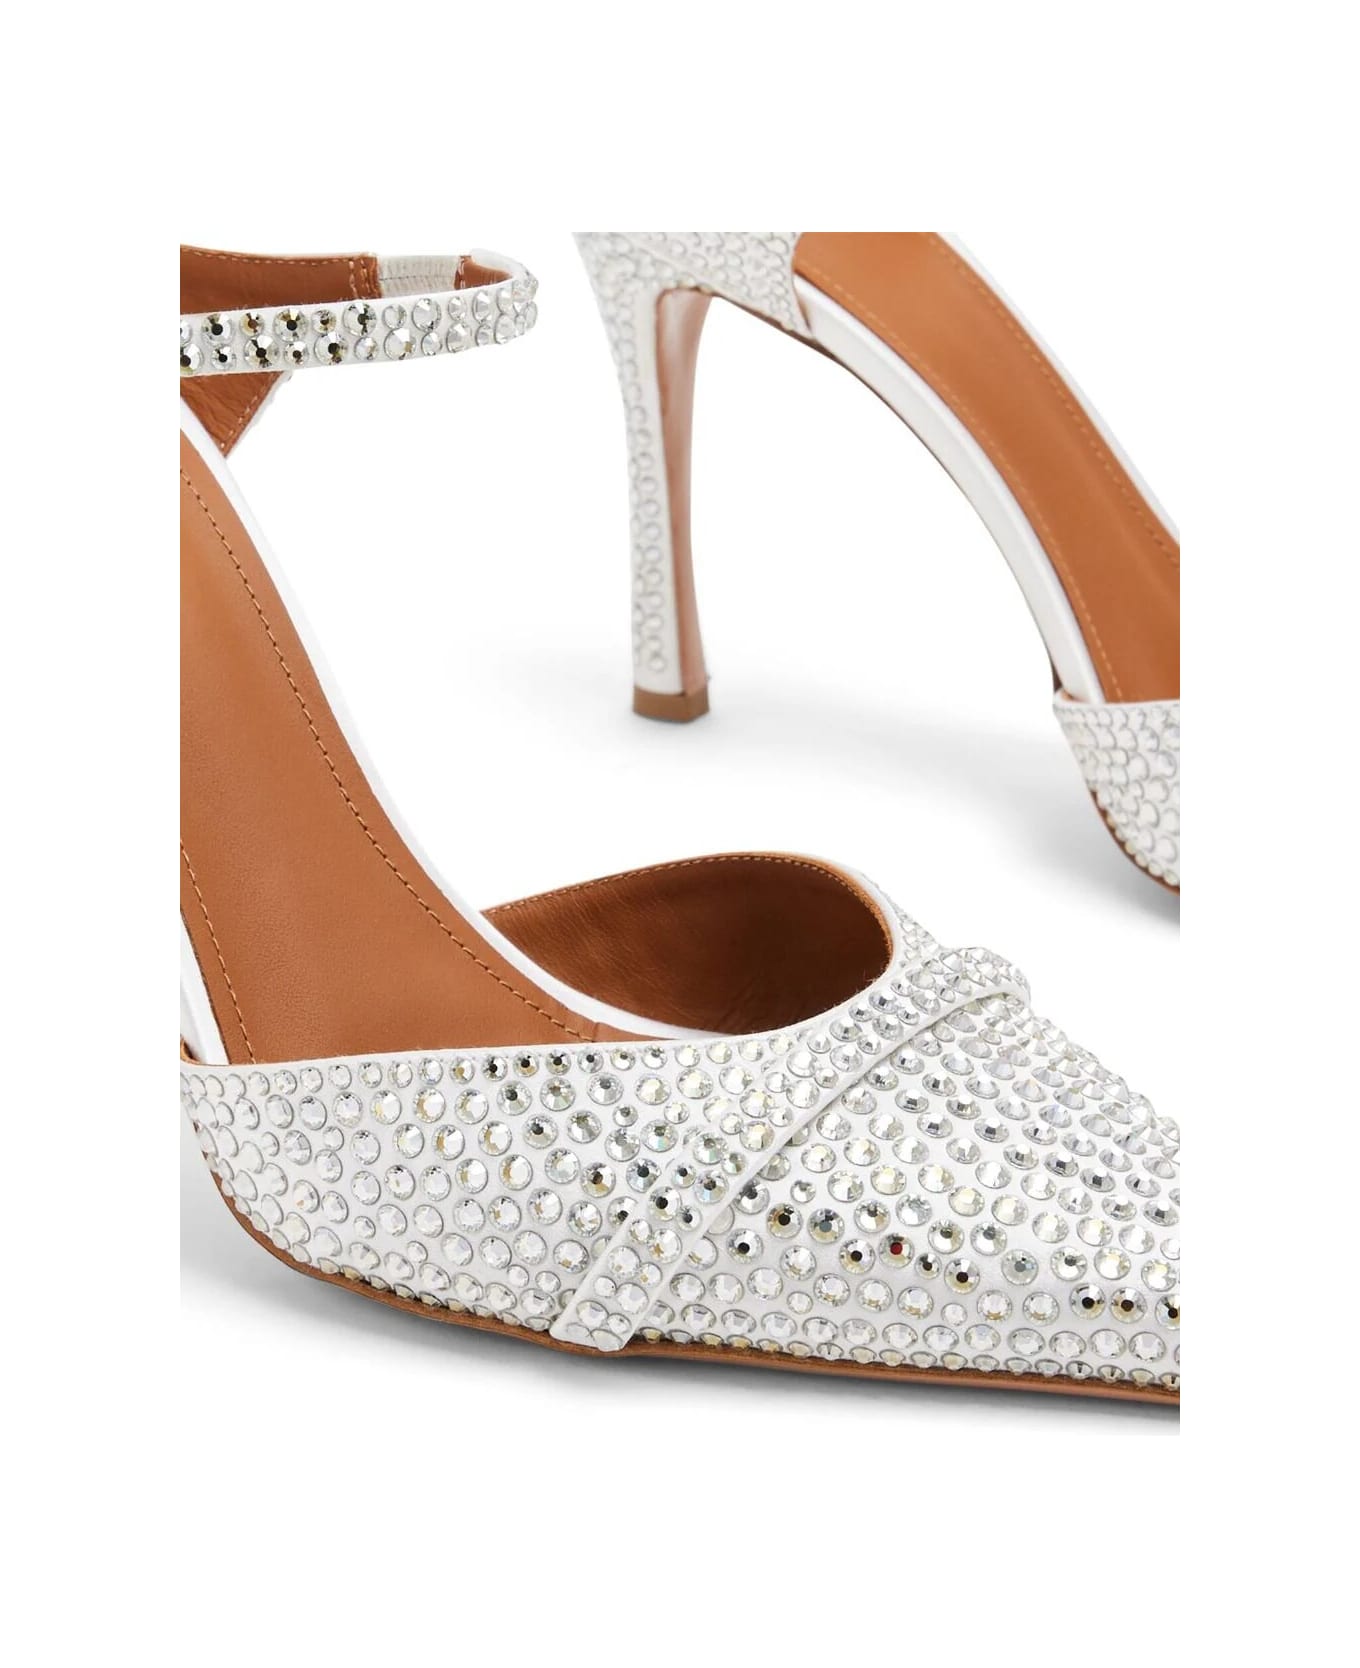 Malone Souliers Mules All Strass - White White ハイヒール